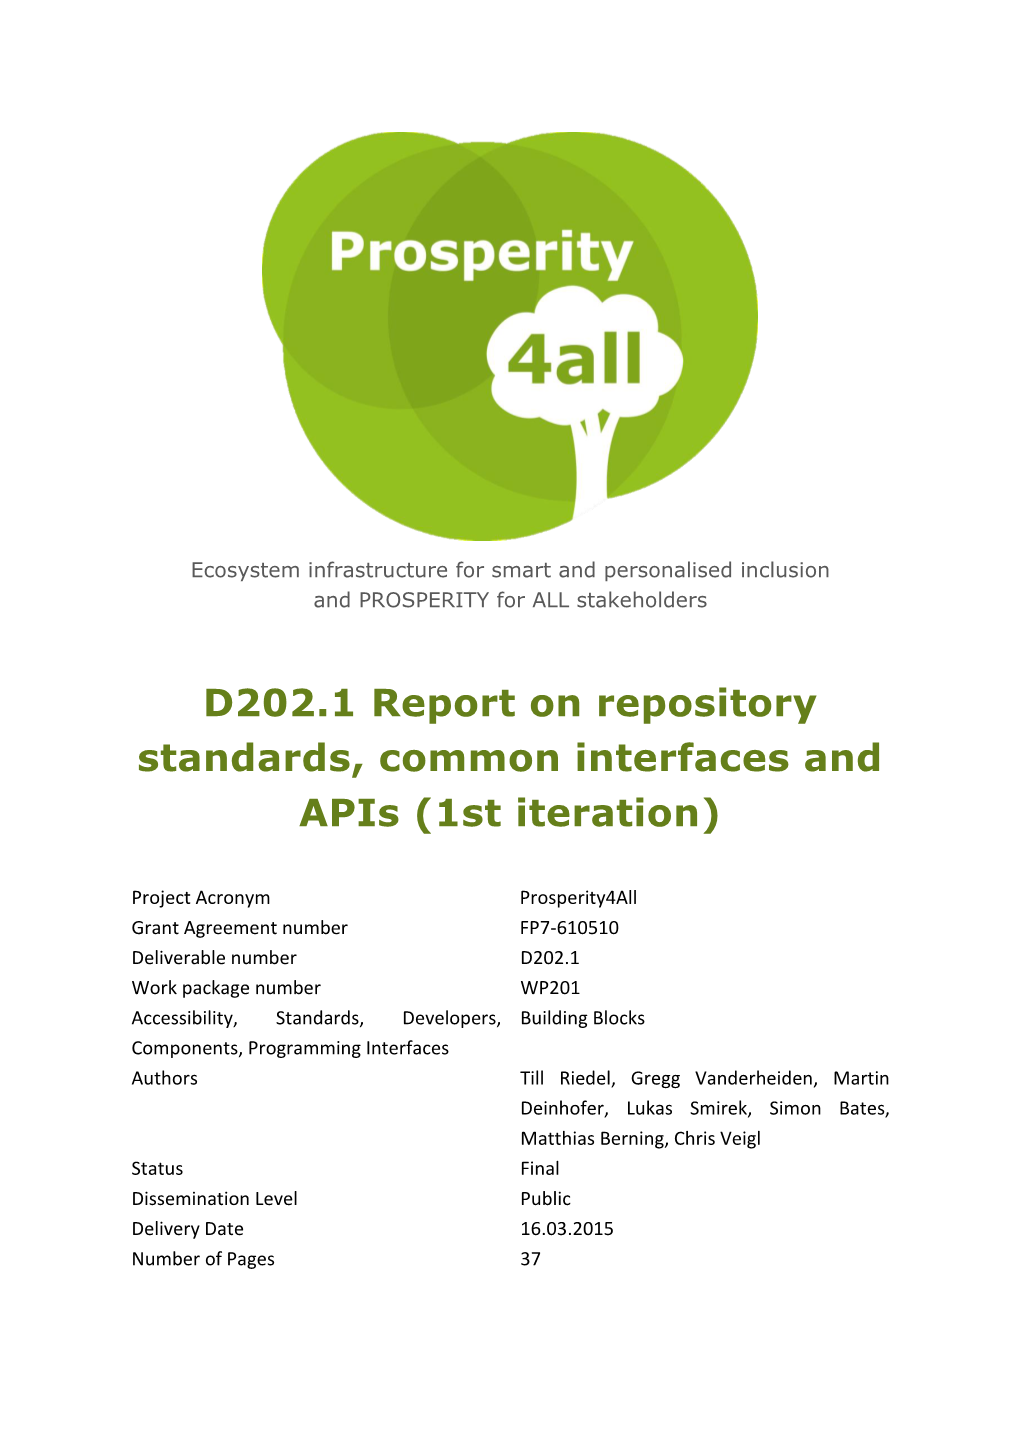 Report on Repository Standards, Common Interfaces and Apis (1St Iteration)